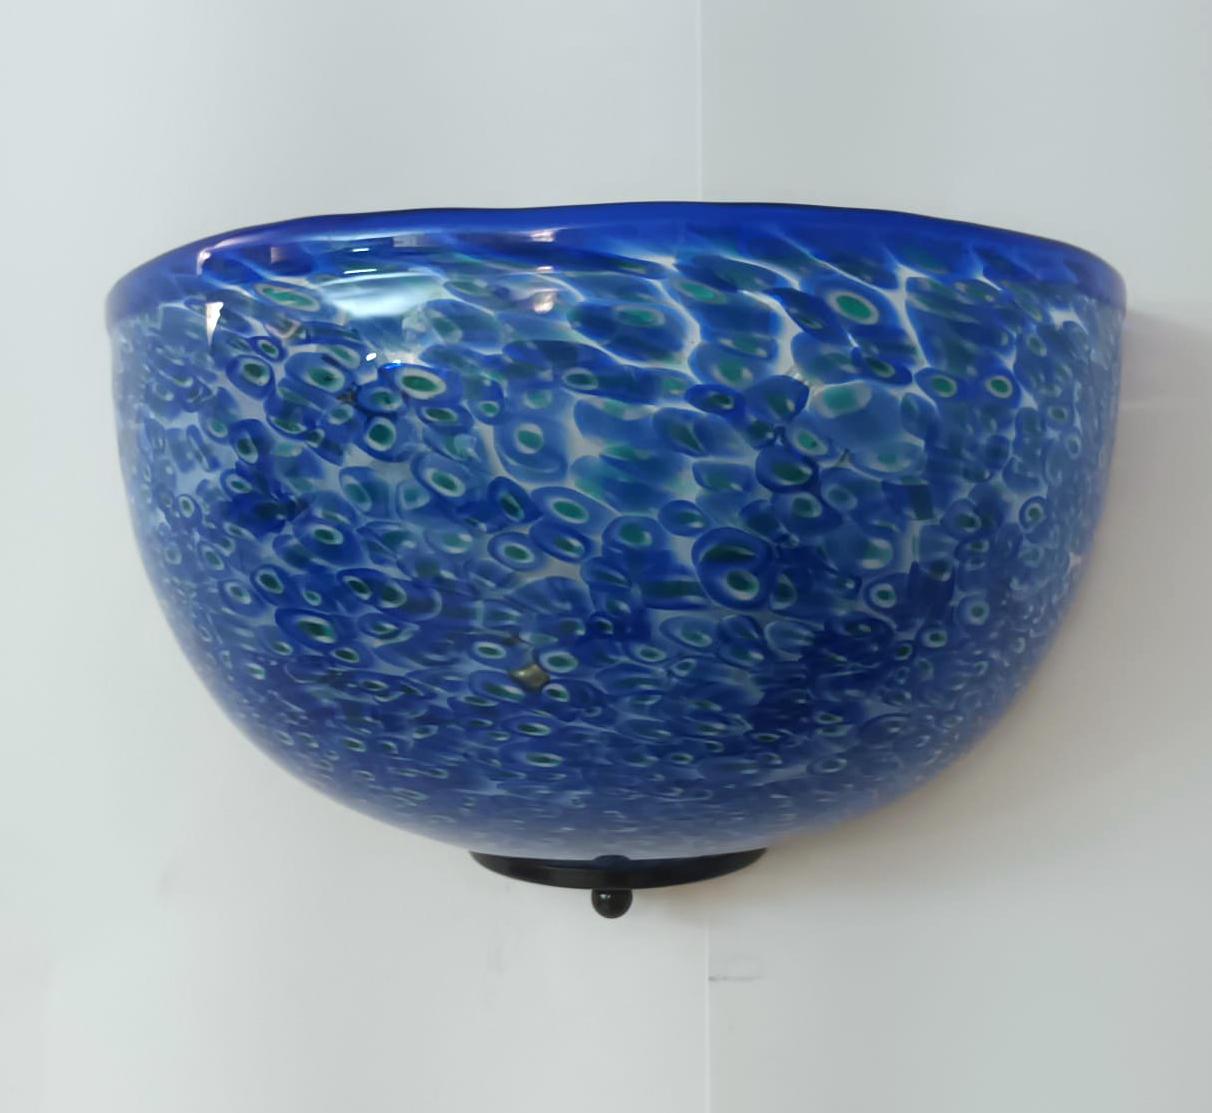 Italian wall lights with blue Murano glasses and melted murrine, designed by Gae Aulenti for Vistosi, made in Italy circa 1960s
Measures: height 7 inches, width 11 inches, depth 5.5 inches
2 lights / E26 or E27 type / max 60W each
3 available in